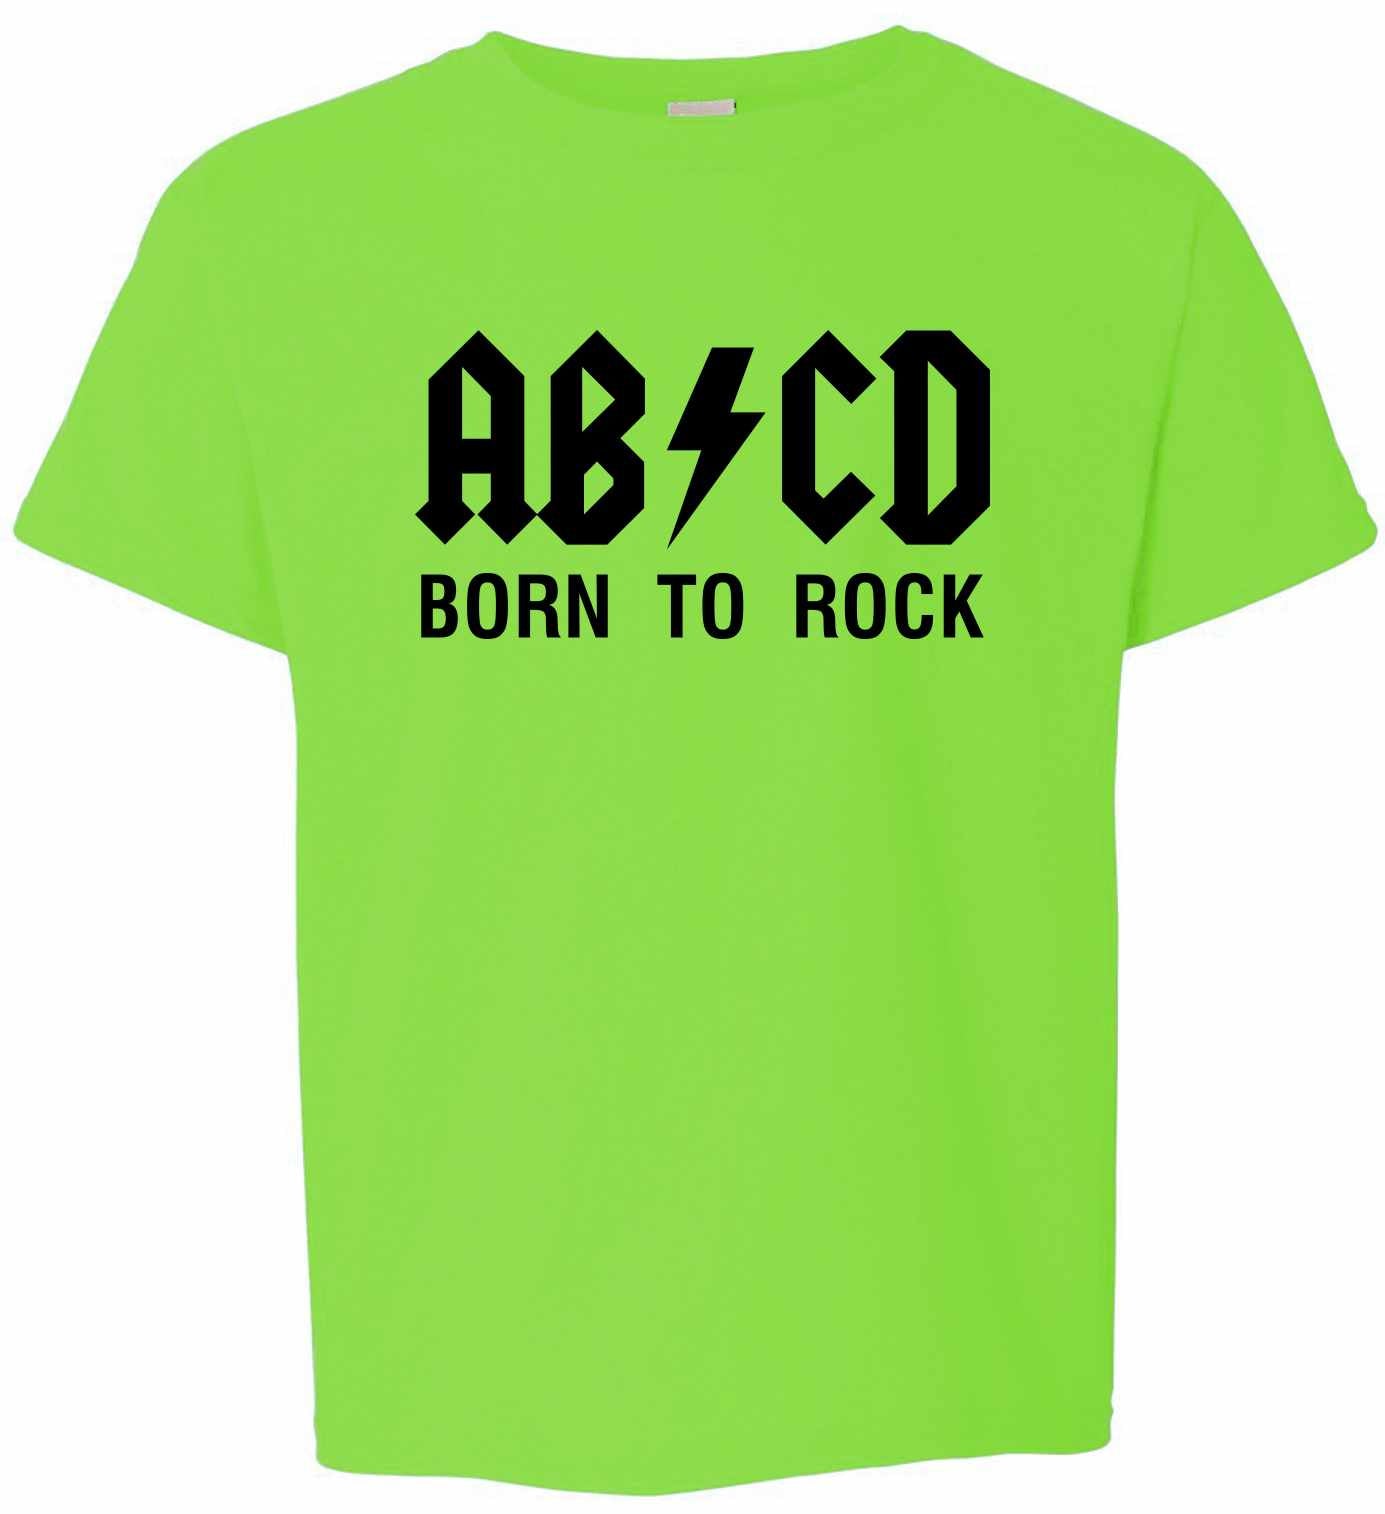 ABCD Born To Rock on Kids T-Shirt (#1233-201)